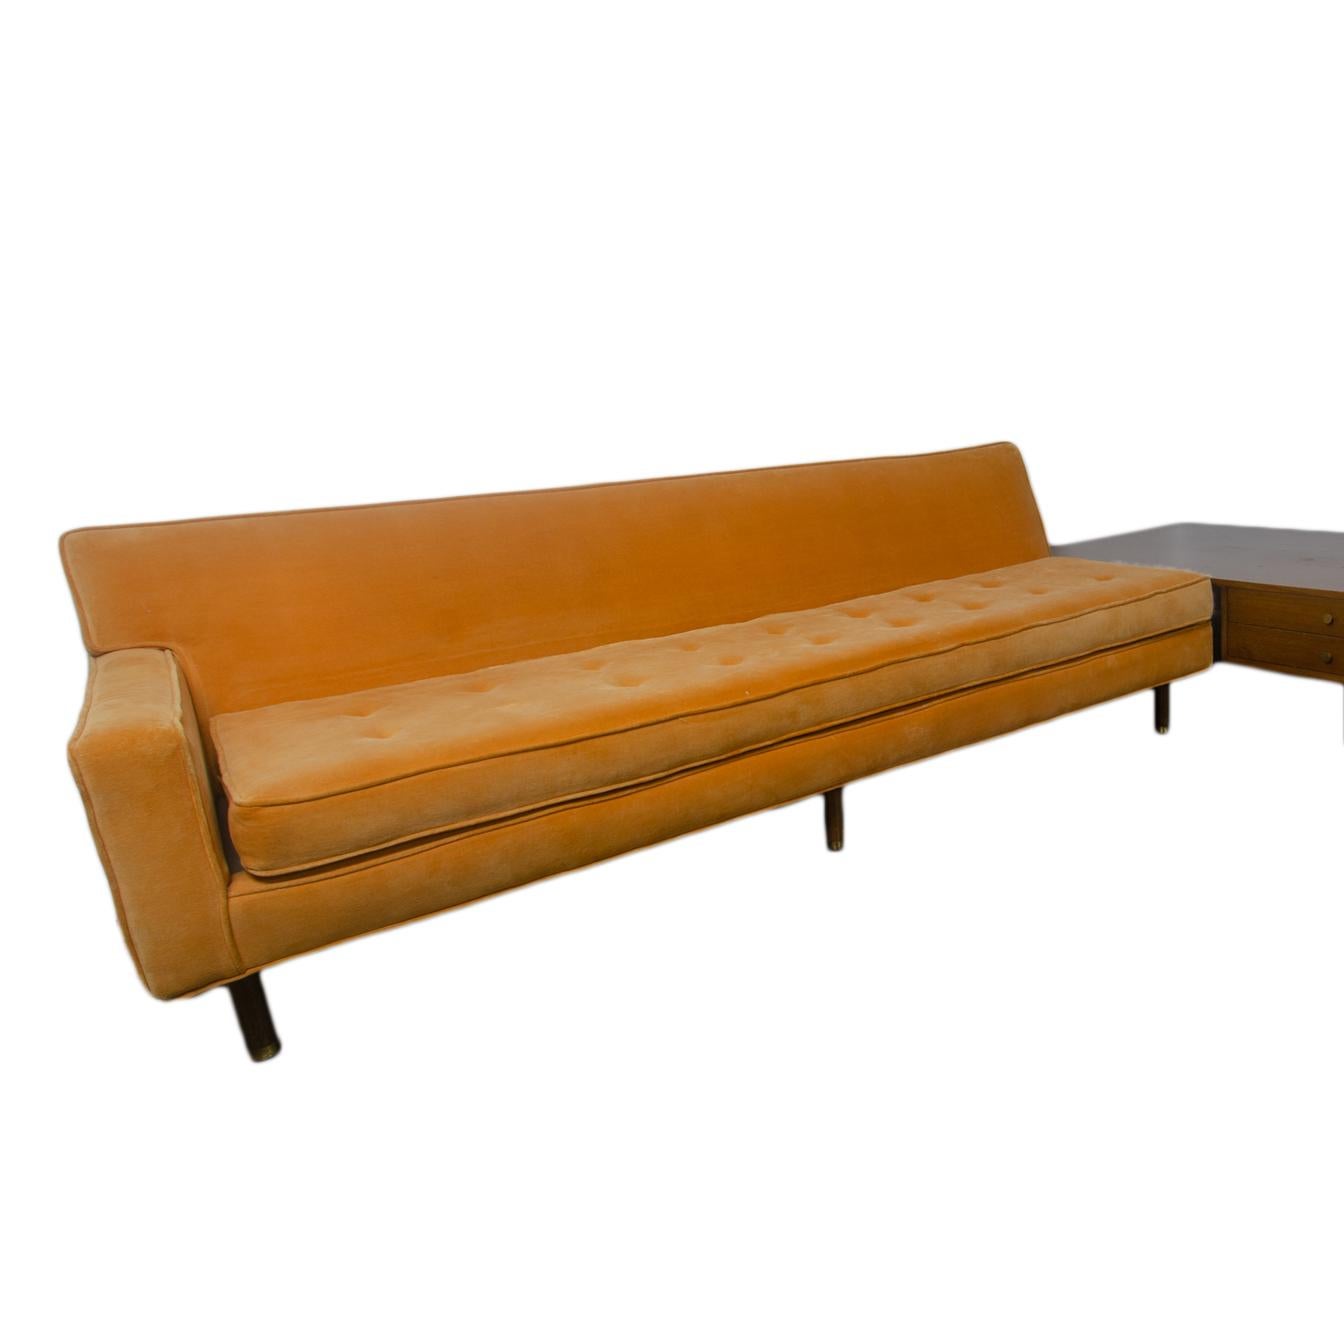 Sectional corner sofa with integrated end table, 1960s.  
Original orange velvet upholstery.  

sofa with full back: 84 inches wide by 33 inches deep by 30 inches tall
sofa with half back: 79 inches wide by 33 inches deep by 30 inches tall
table: 56